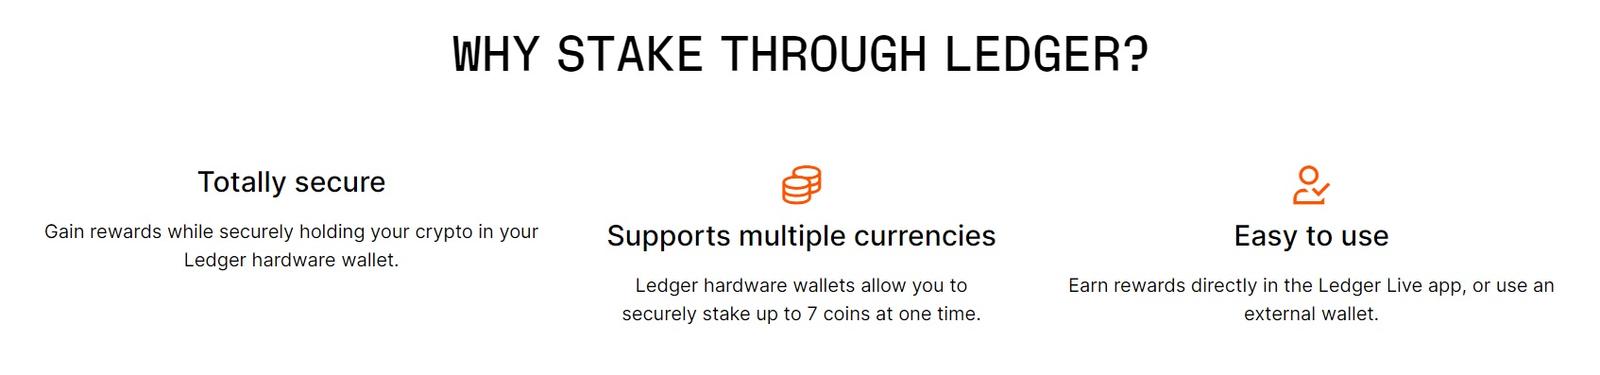 Benefits of staking crypto using a wallet